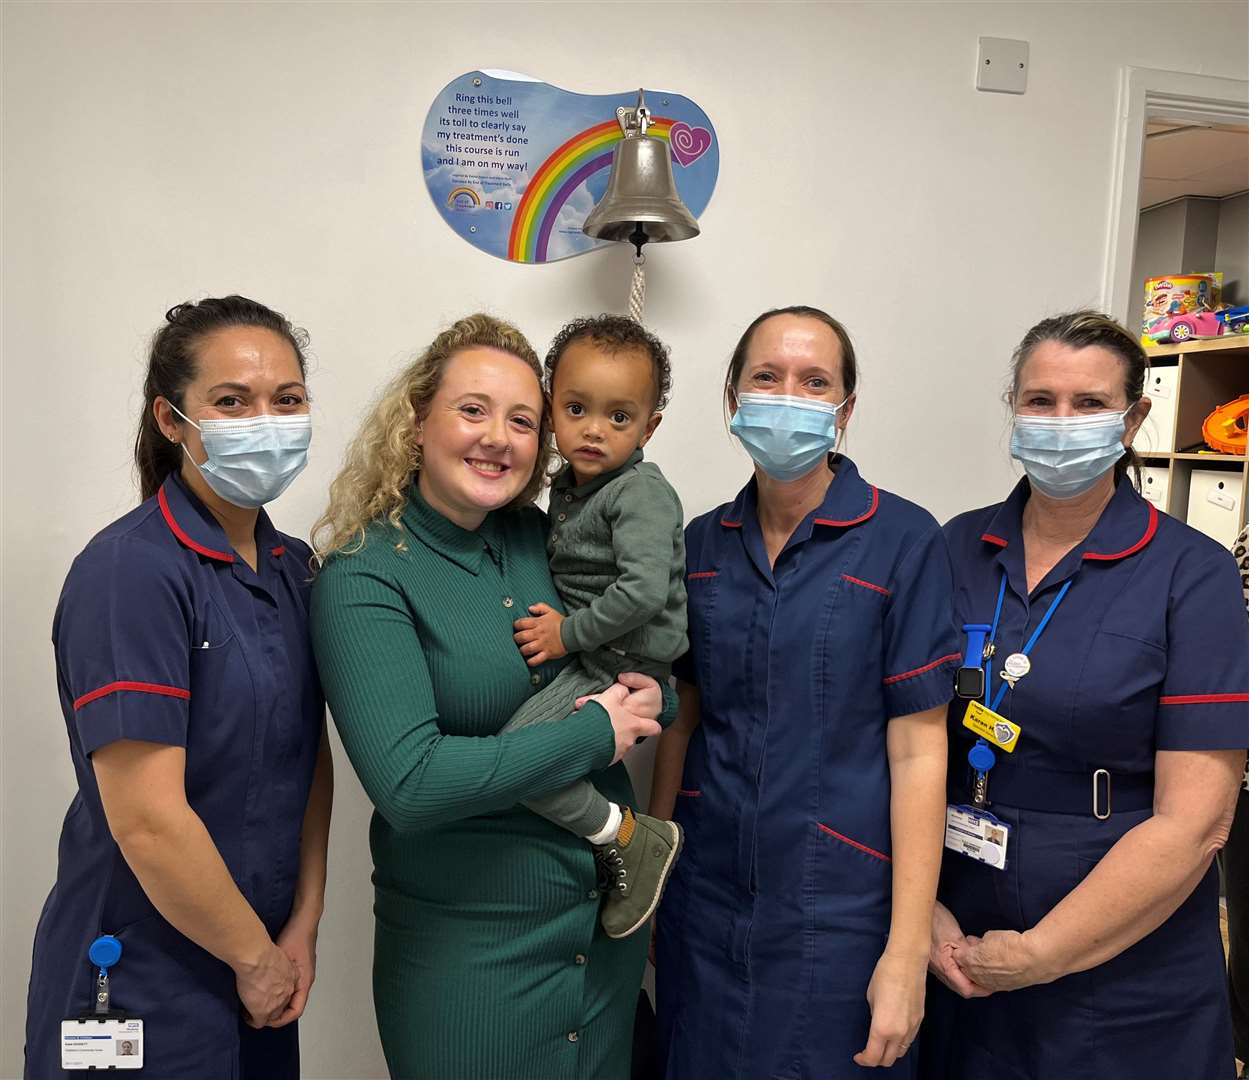 Katie Dennett, Children’s Oncology Nurse, Deborah Waters, Children’s Oncology Nurse; Karen Hartley, Clinical Nurse Specialist, with Tadhg Mealey and his mum Courtney (centre). Picture: Medway NHS